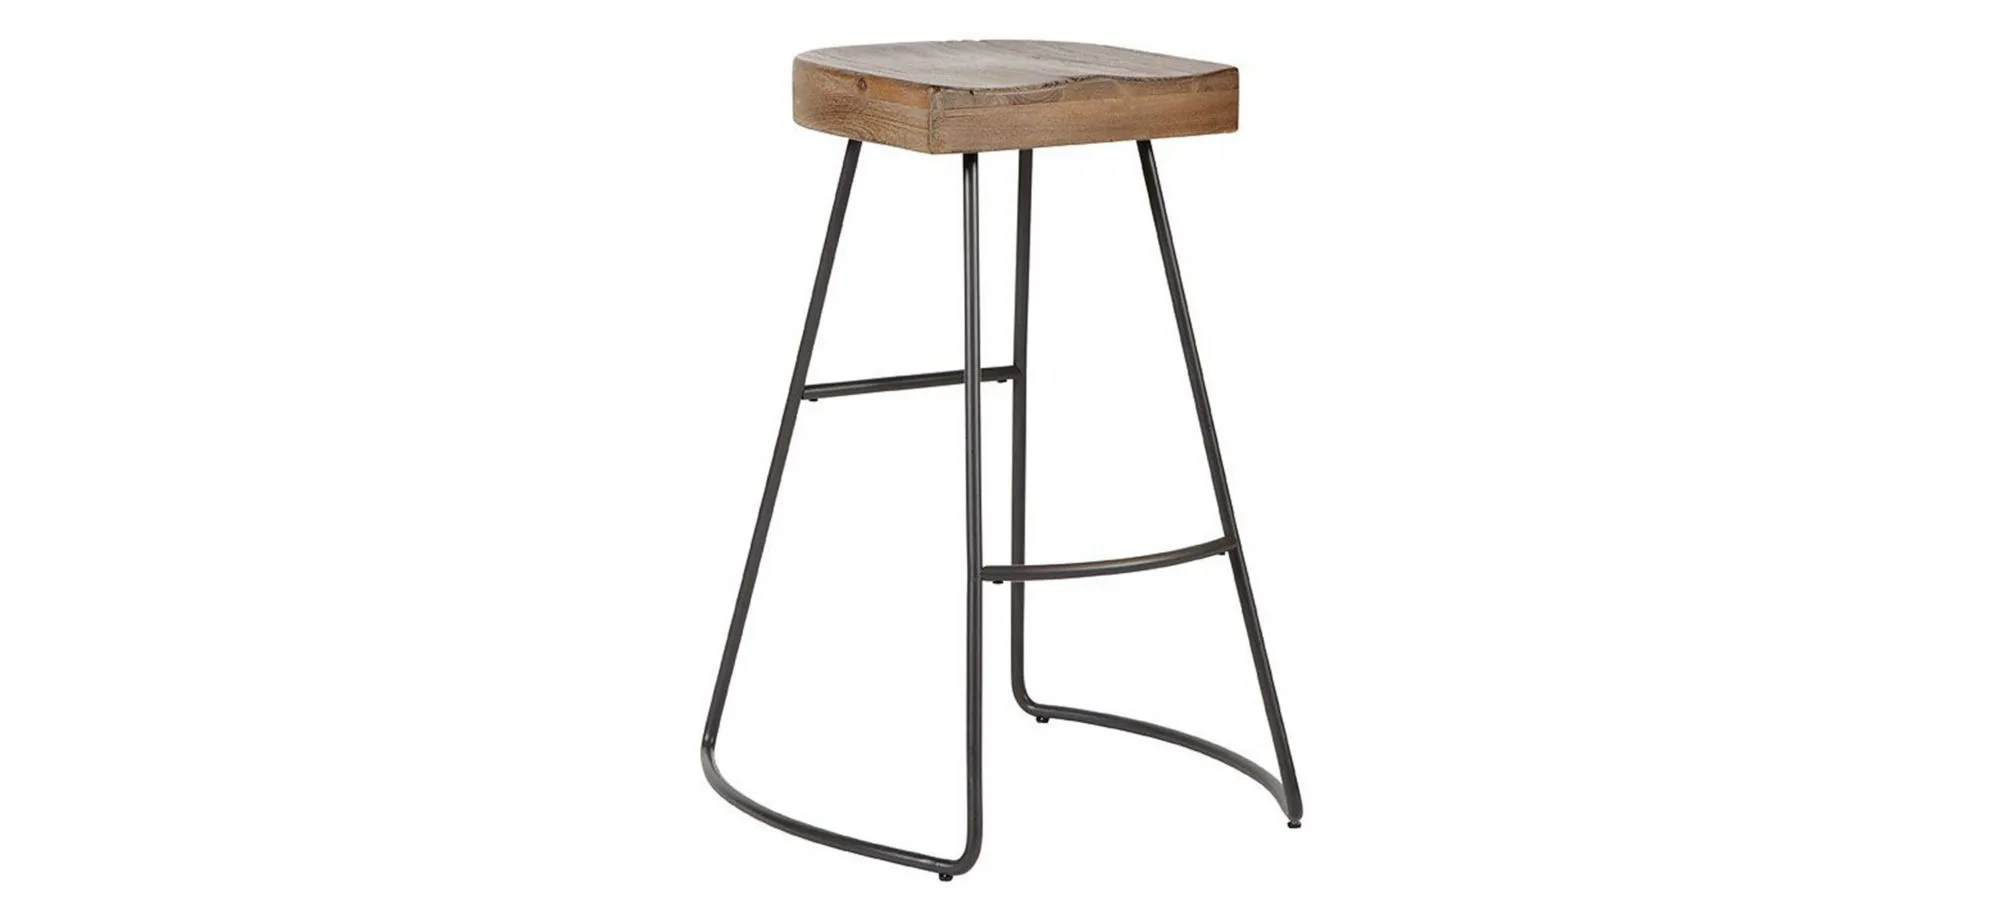 Gage Bar Stool in brown by Avalon Furniture